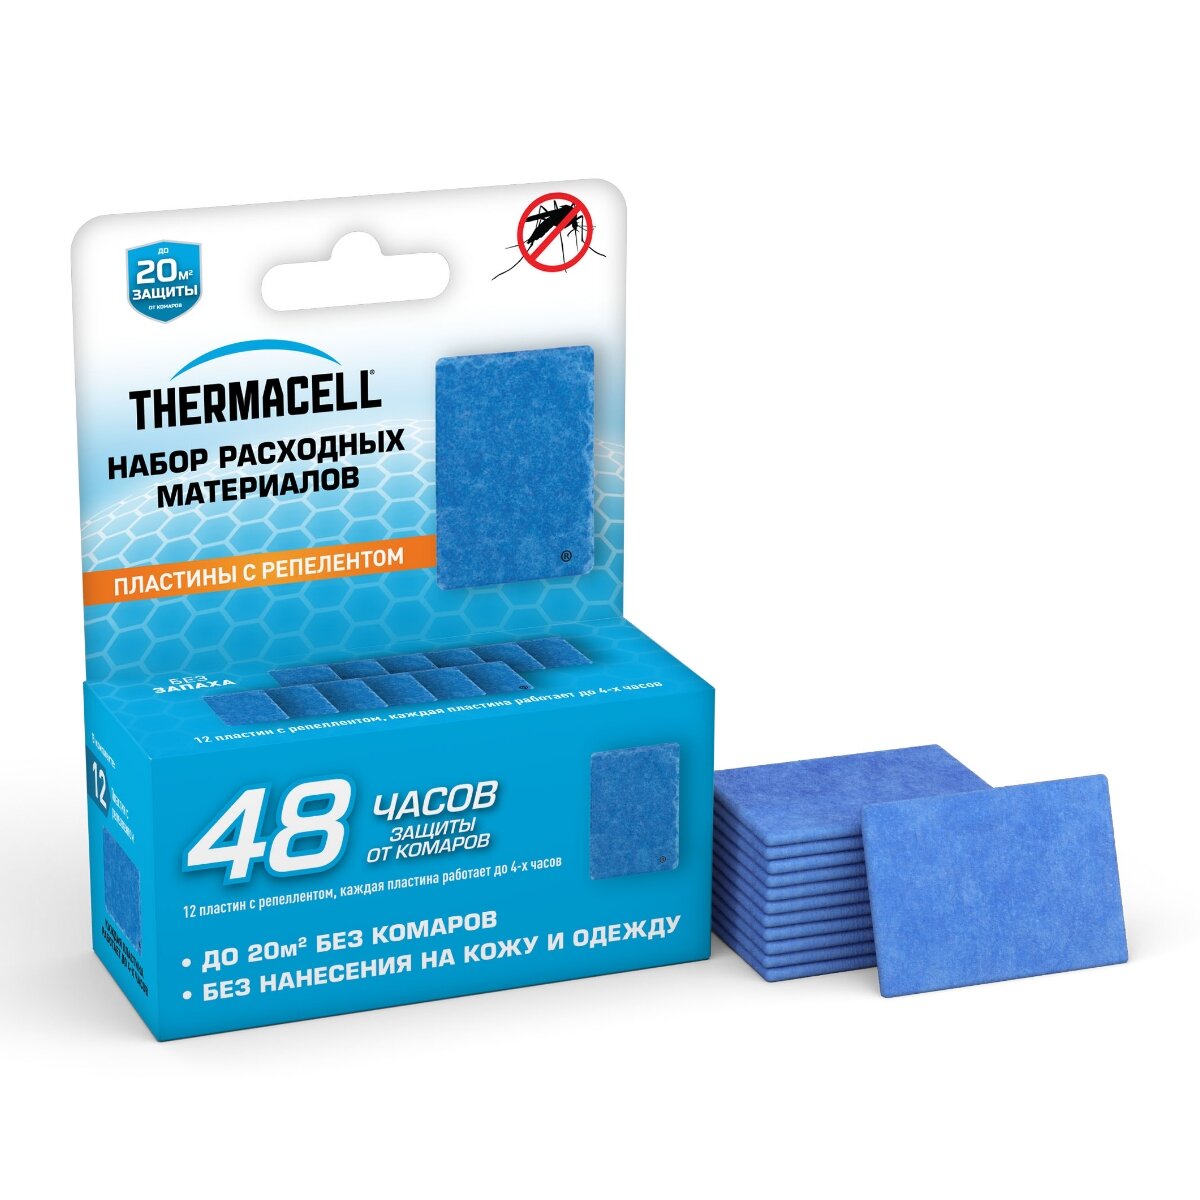 Thermacell Набор пластин Thermacell Backpacker Refills 12 шт для отпугивания насекомых